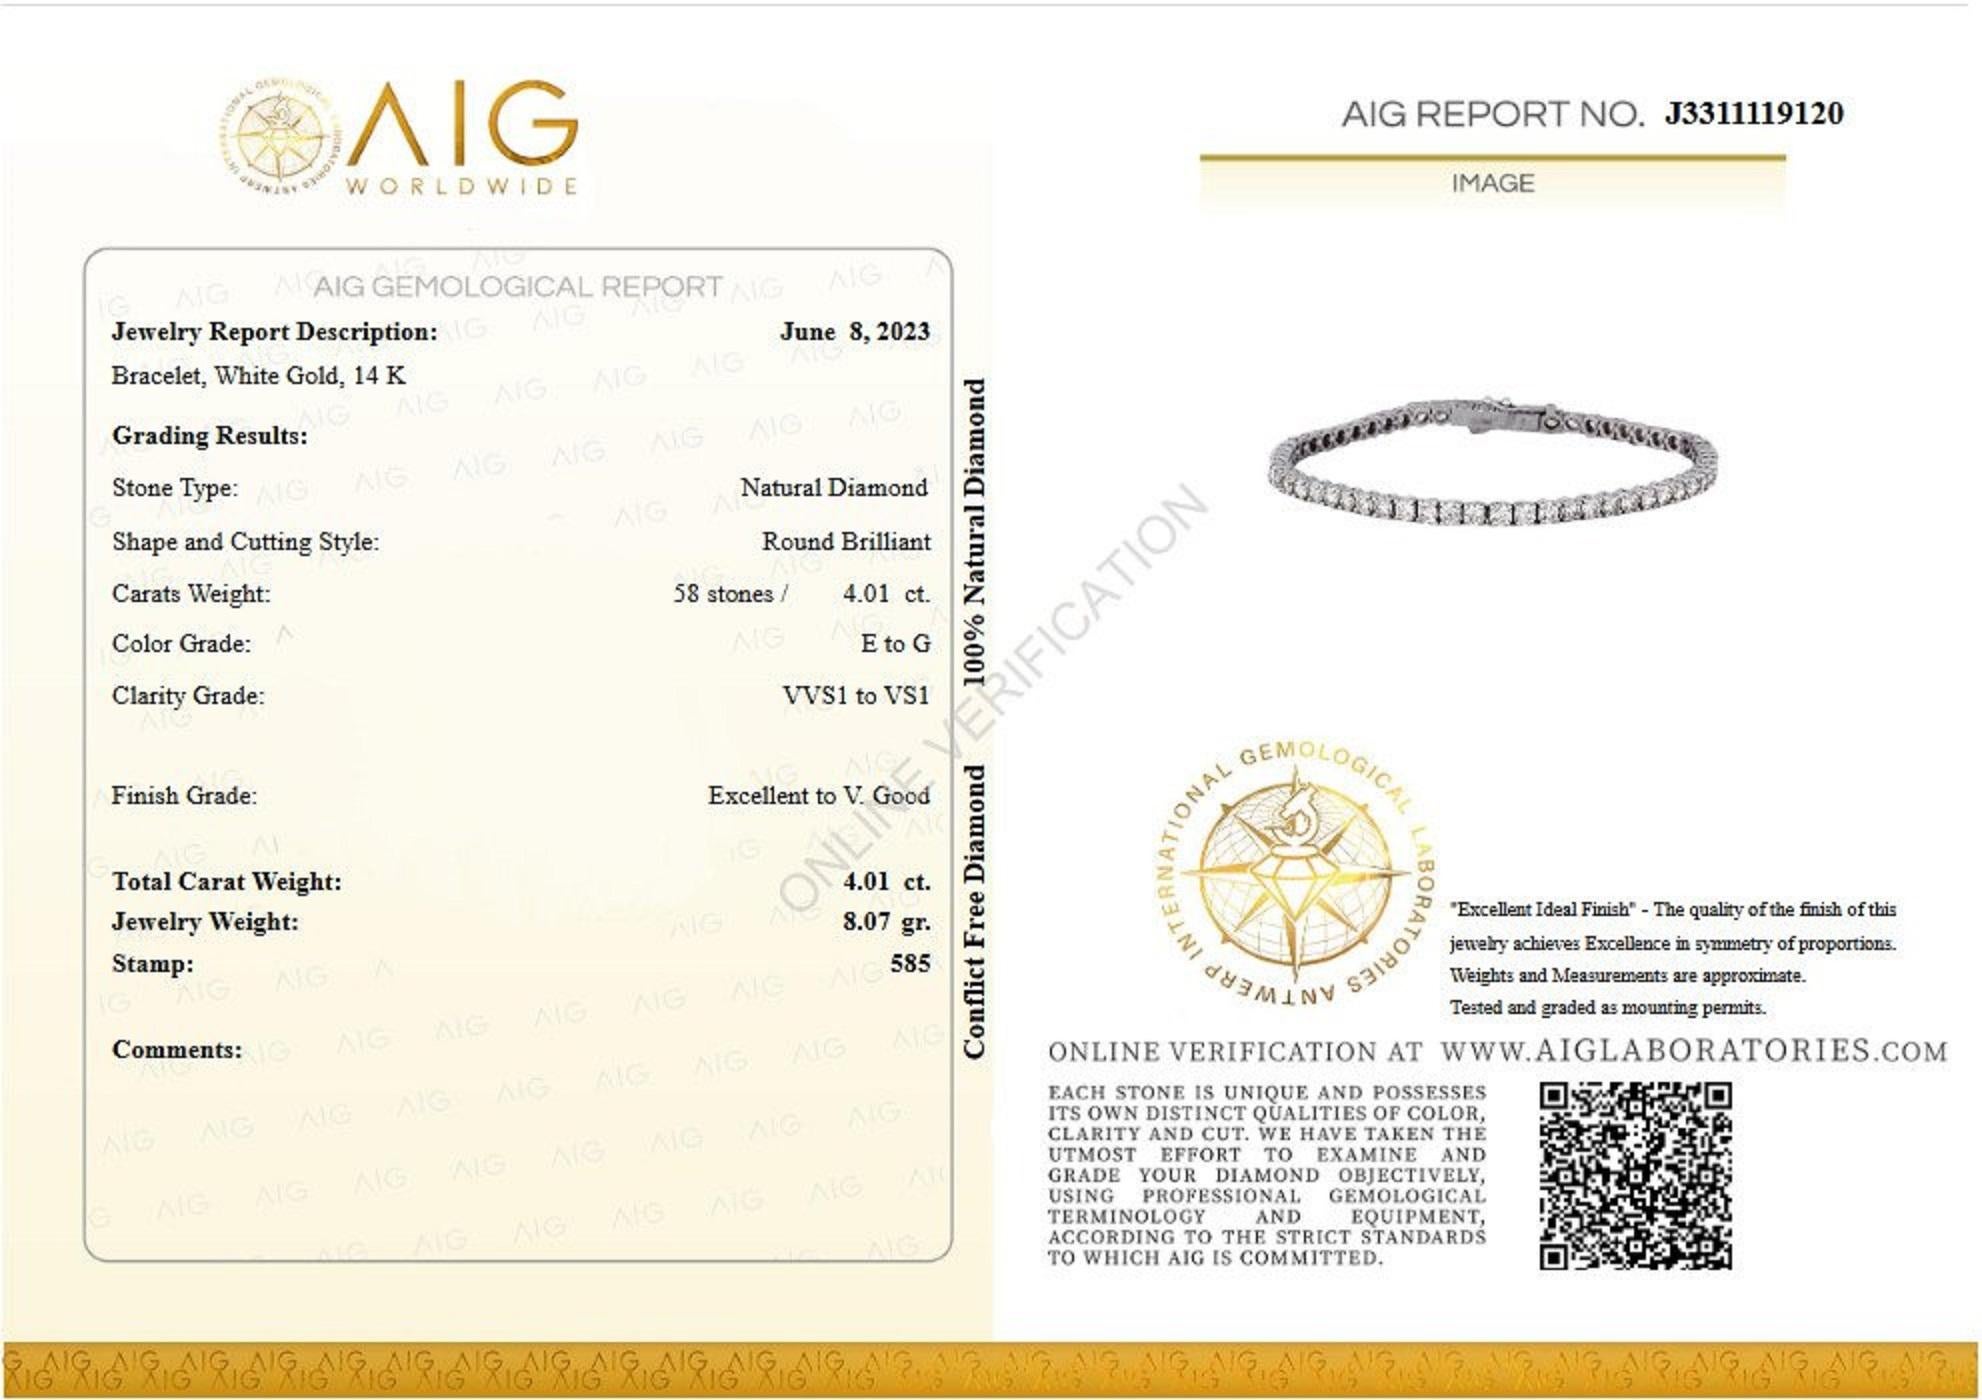 __________
Natural Diamonds
Cut: Round Brilliant
Carat: 4.01 cttw / 58 stones
Color: E to G
Clarity: VVS1 to VS1

Item ships from Israeli Diamonds Exchange, customers are responsible for any local customs or VAT fees that might apply to the